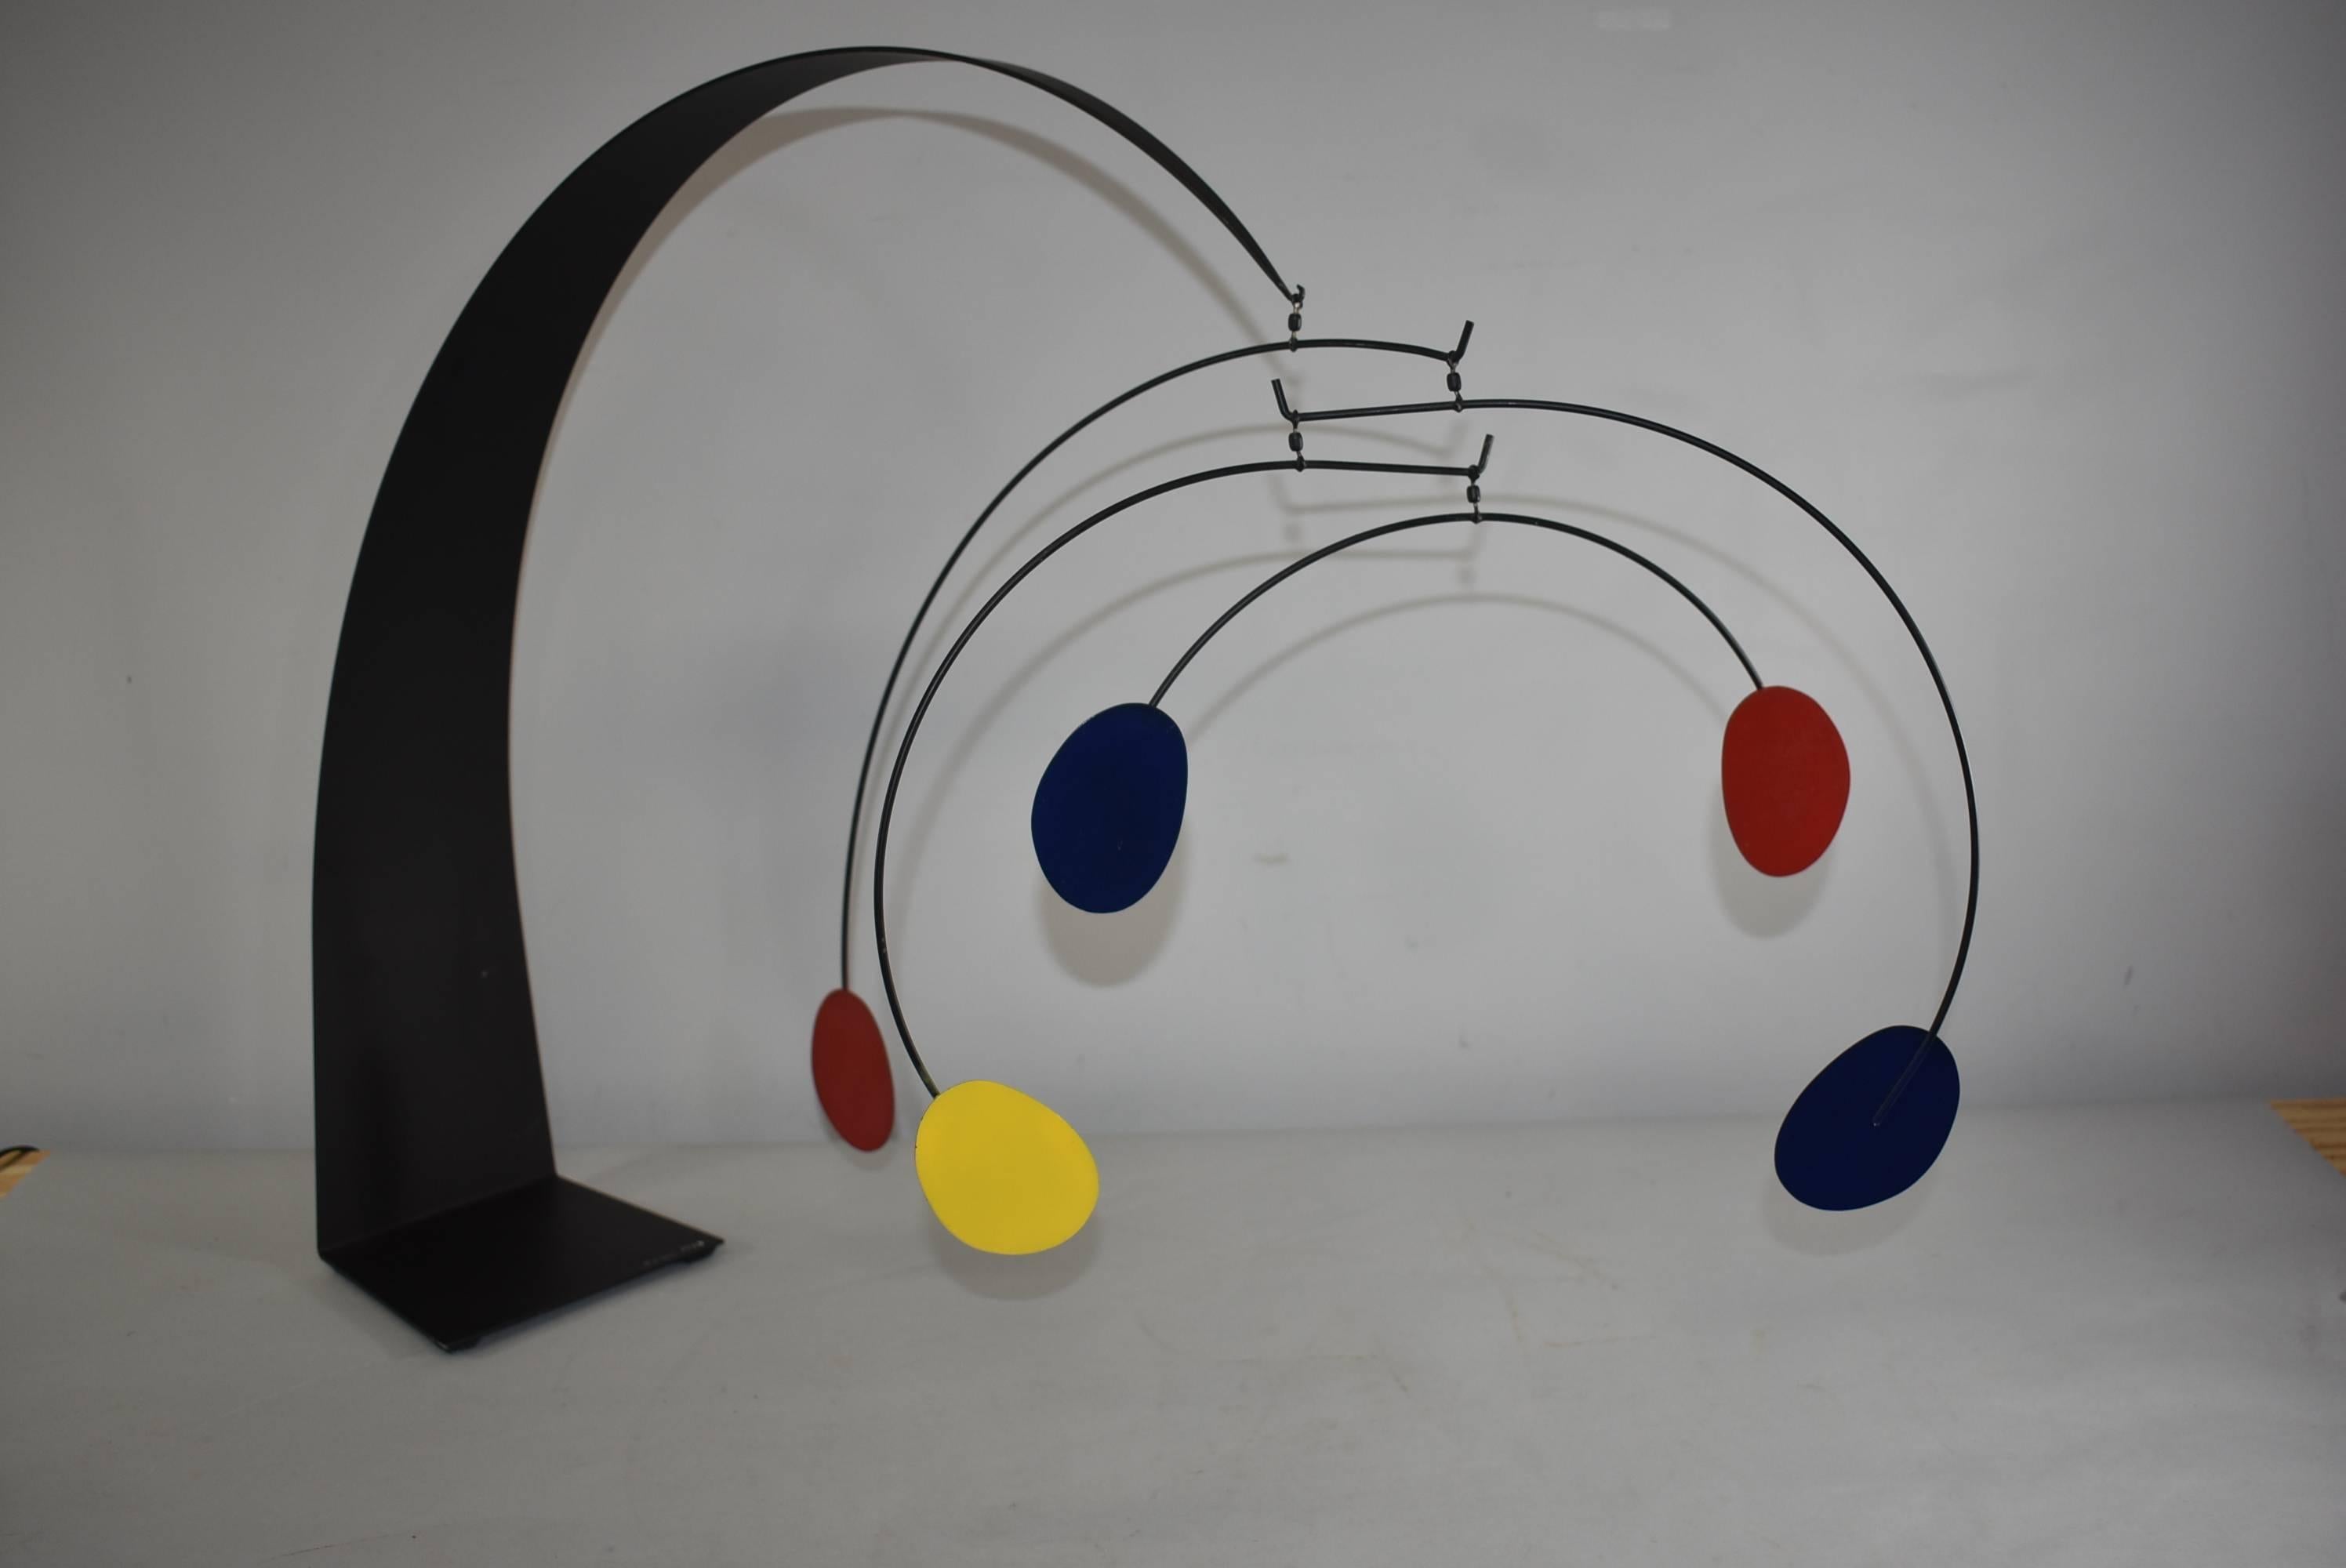 Great sculpture by Curtis Jere. It has a long black painted arm and base which arches gracefully. Four arms are suspended with disks of blue, red and yellow. An impressive size at 25